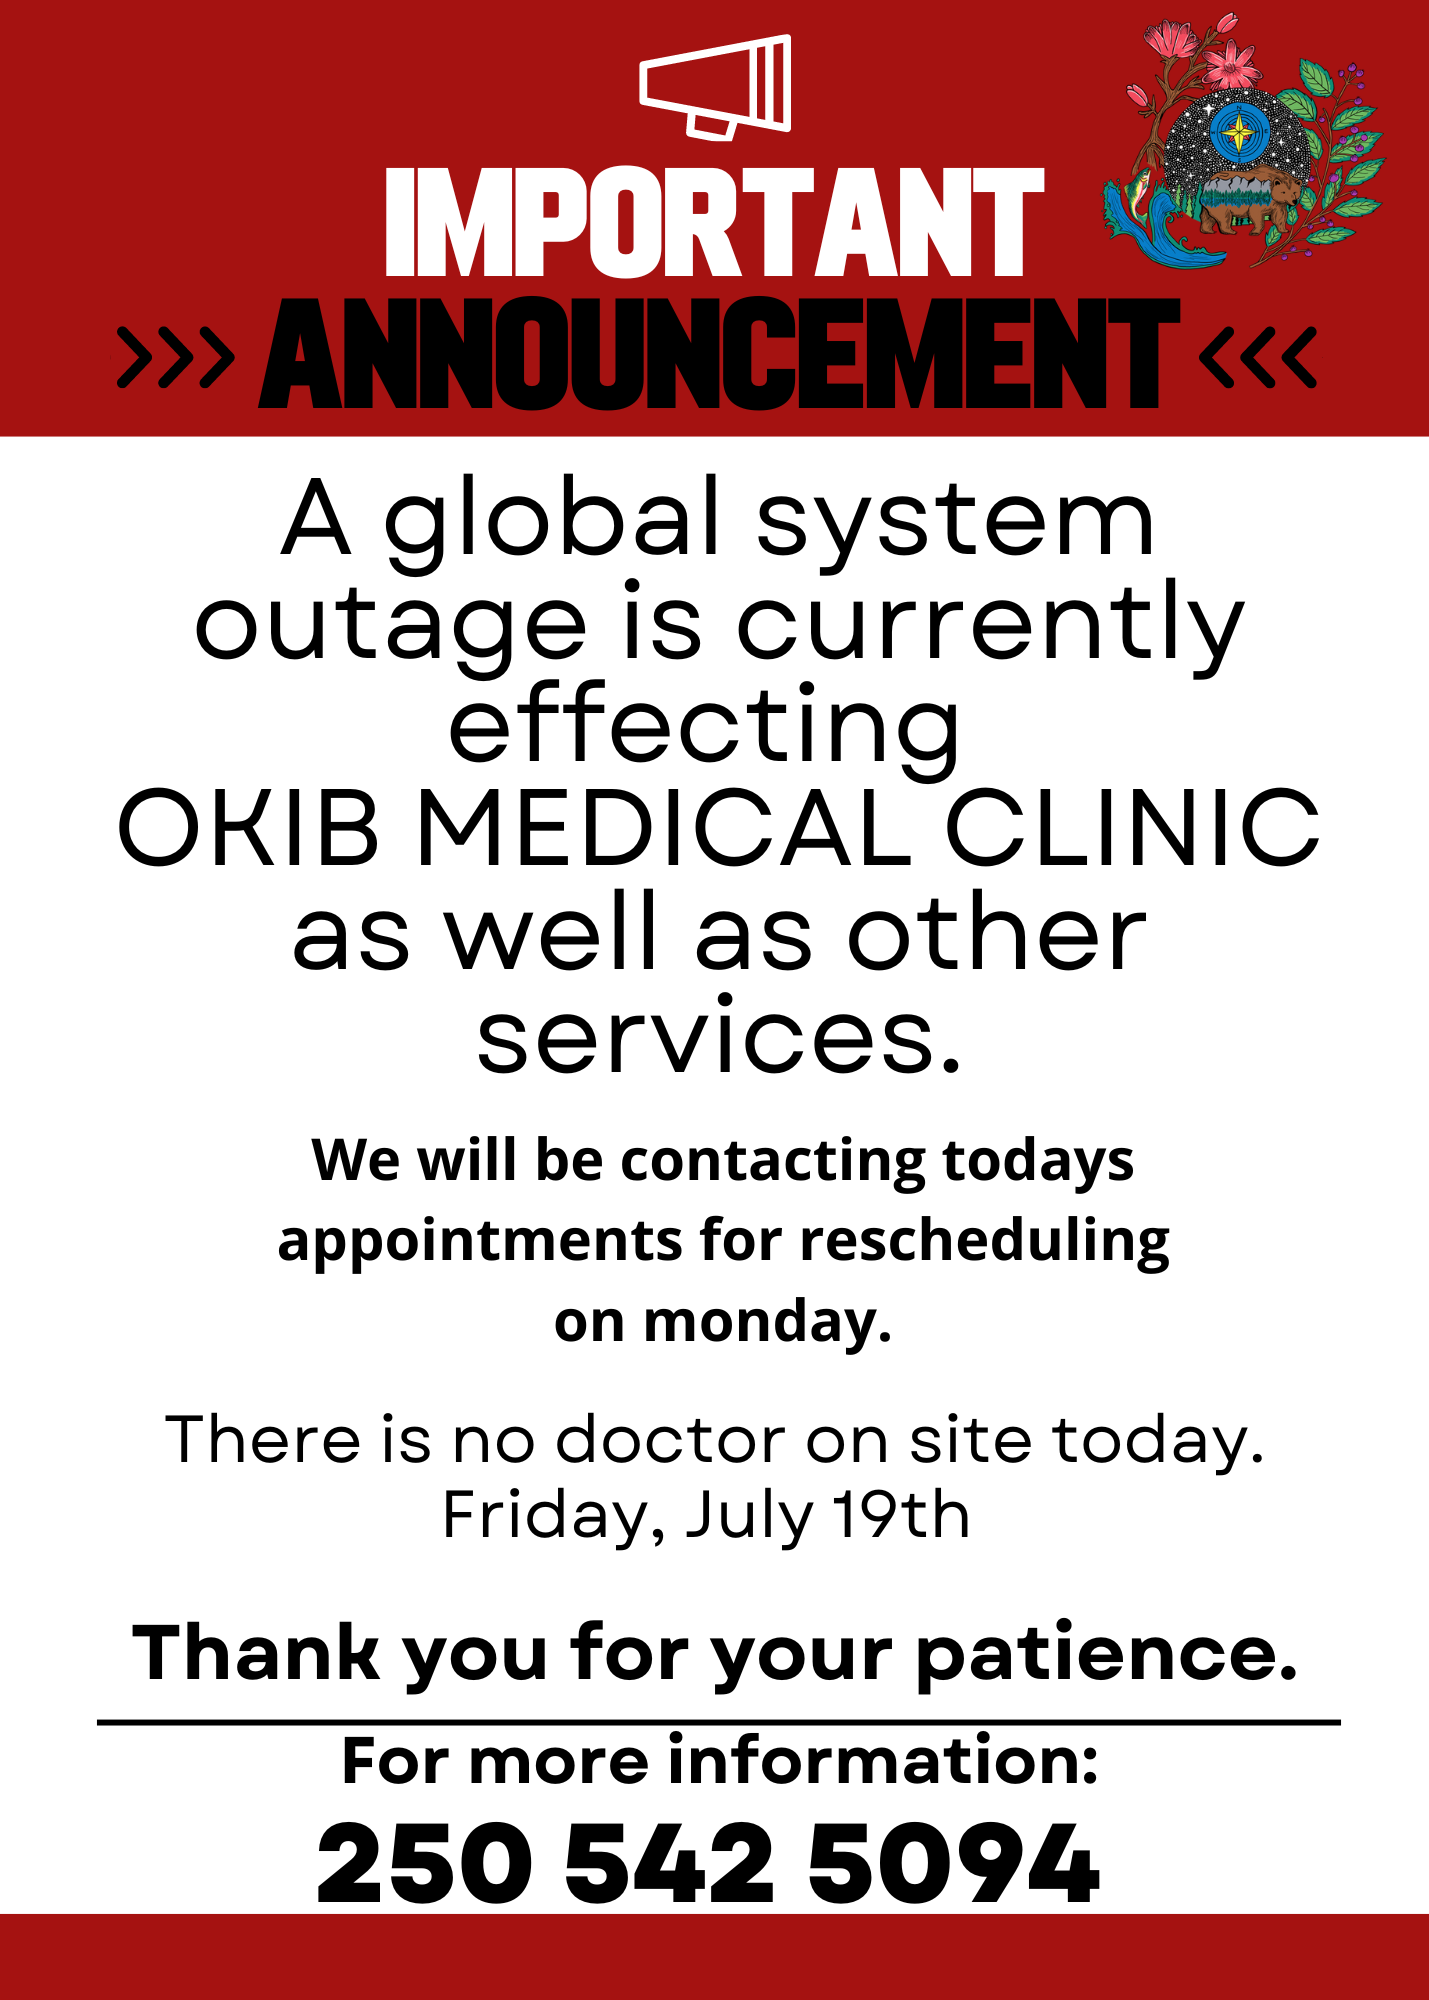 Important Announcement: Global system outage is effecting OKIB Medical Clinic as well as other services.